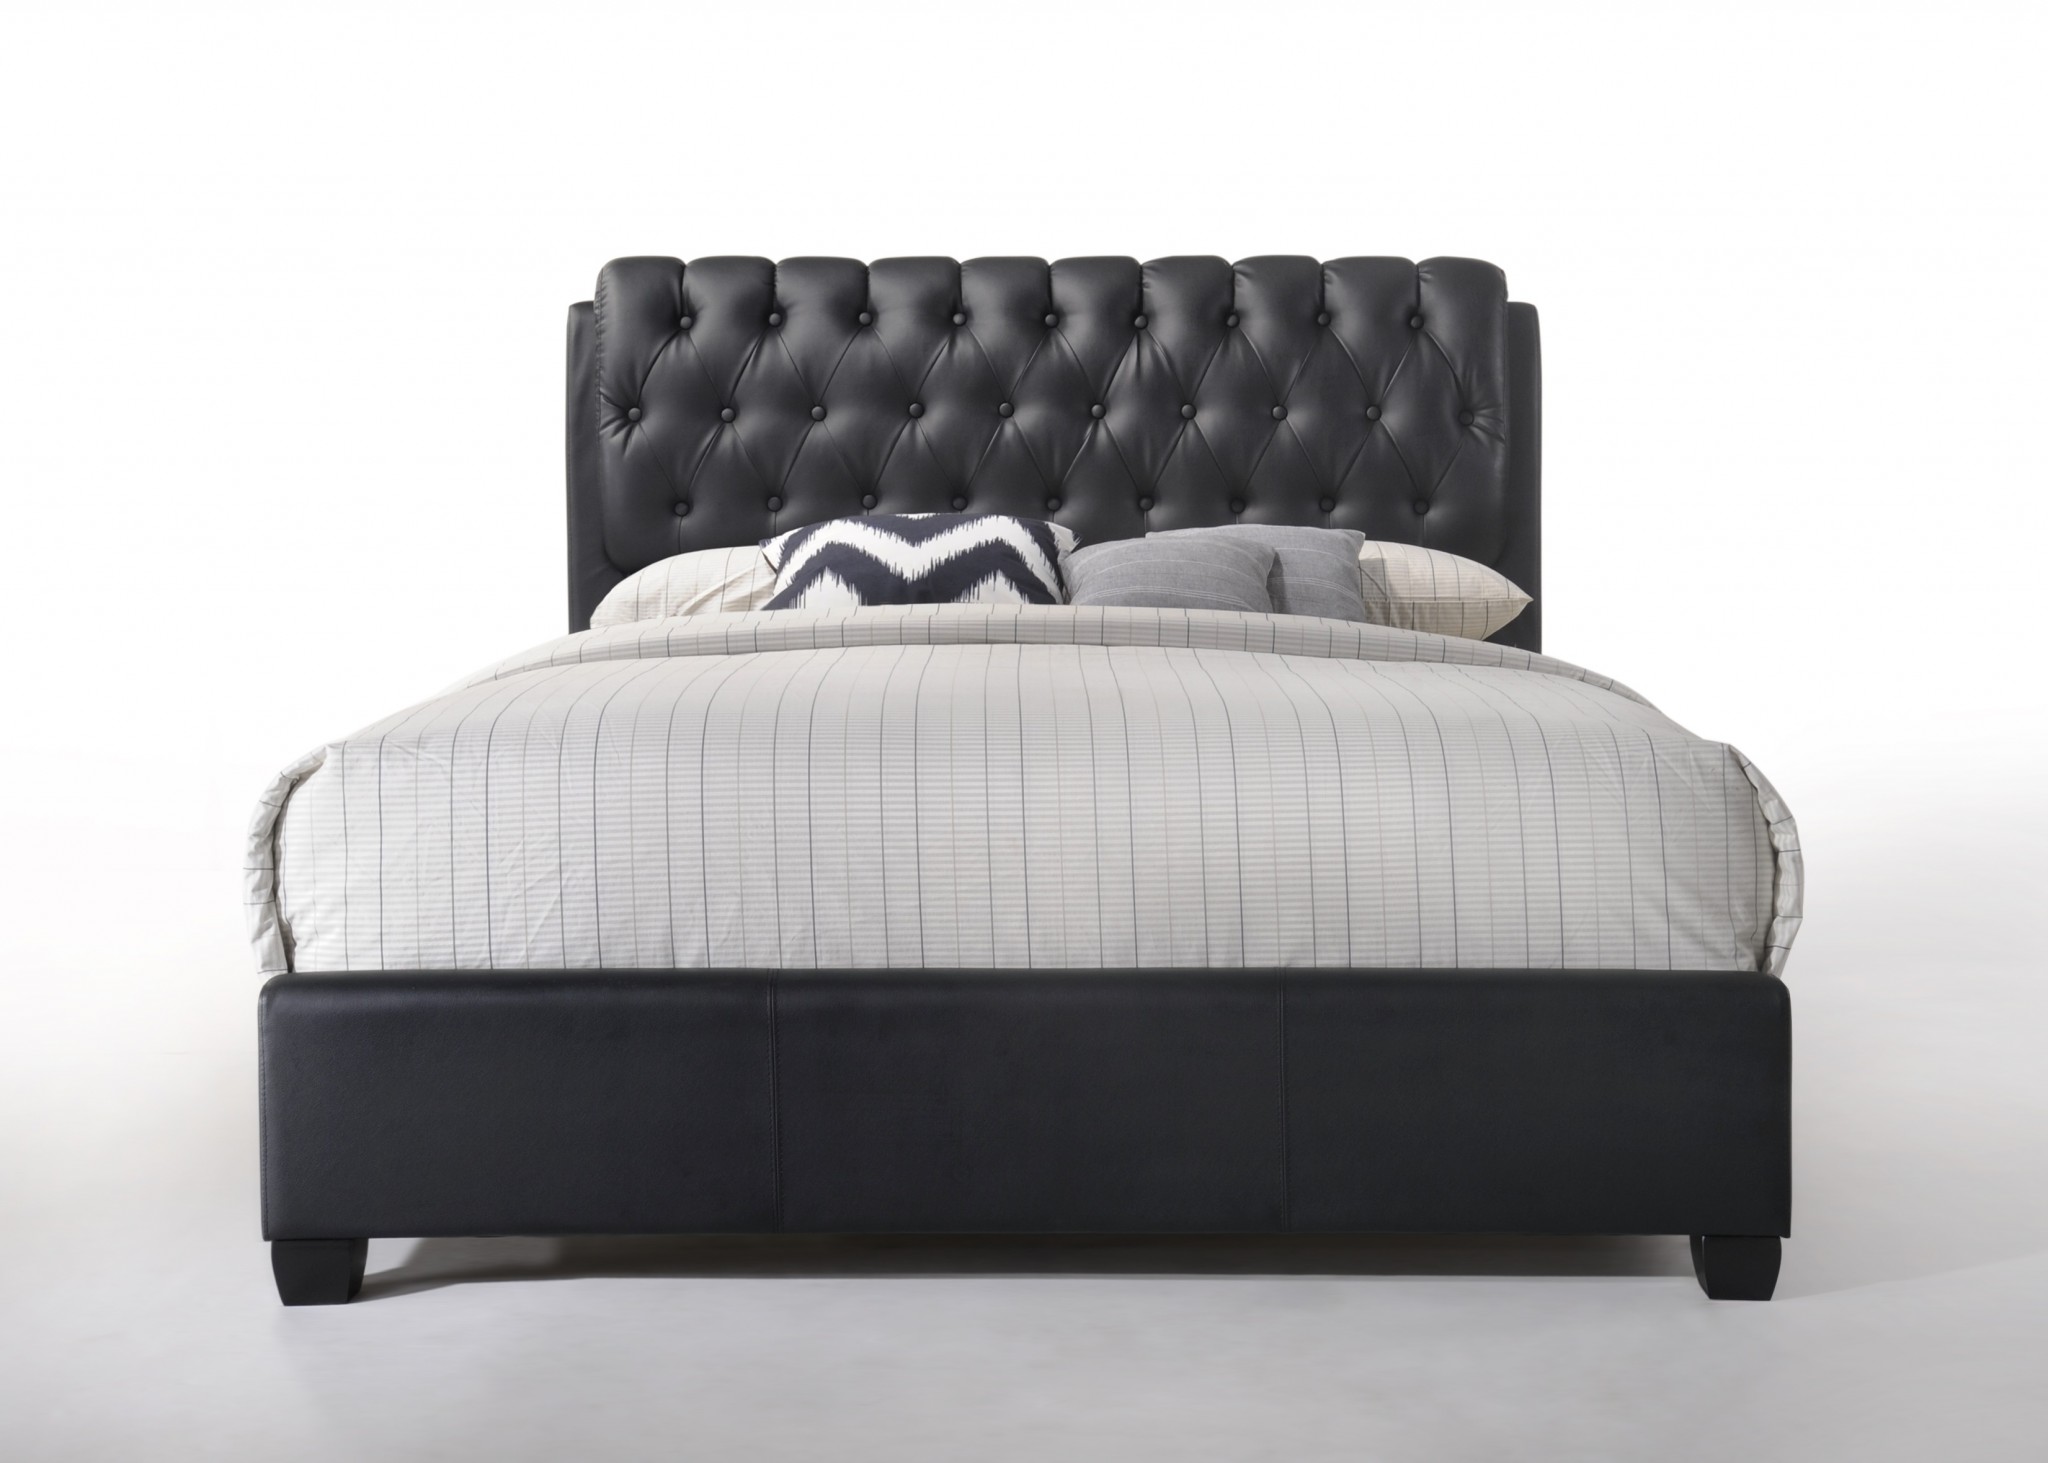 85" X 63" X 50" Black Pu Button Tufted Queen Bed